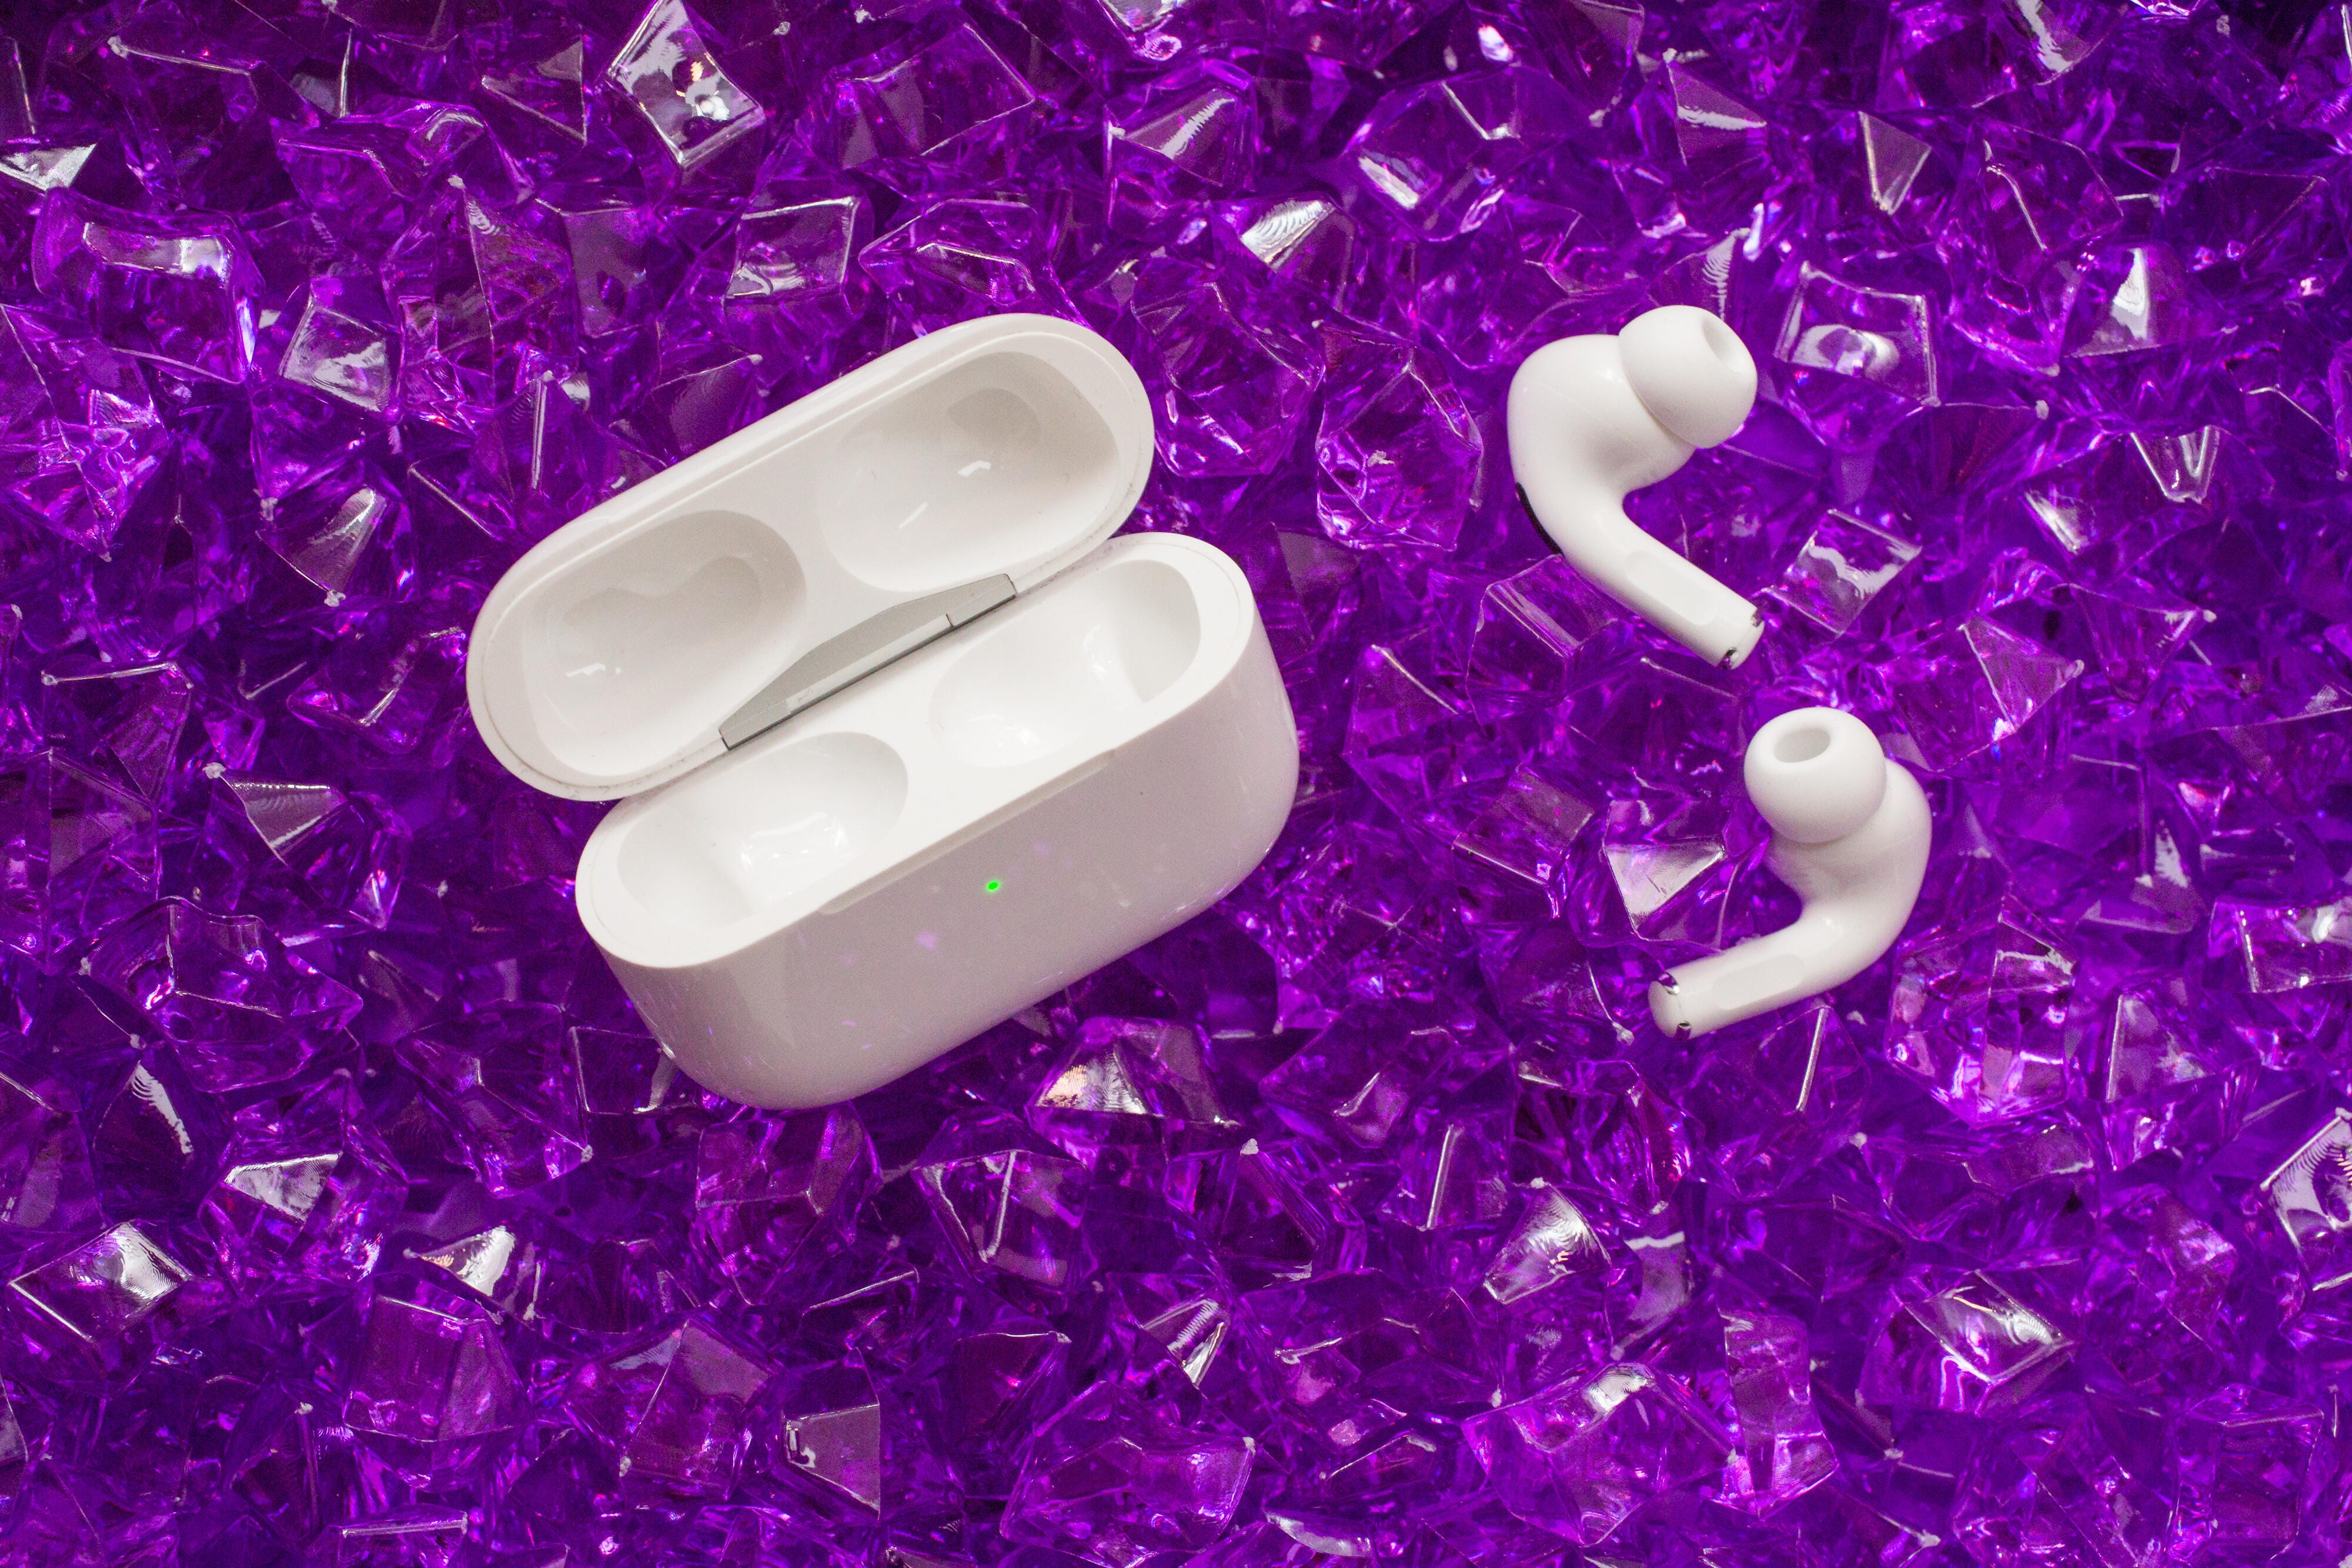 Losing an AirPod sucks. Use this hidden trick to locate your lost earbud